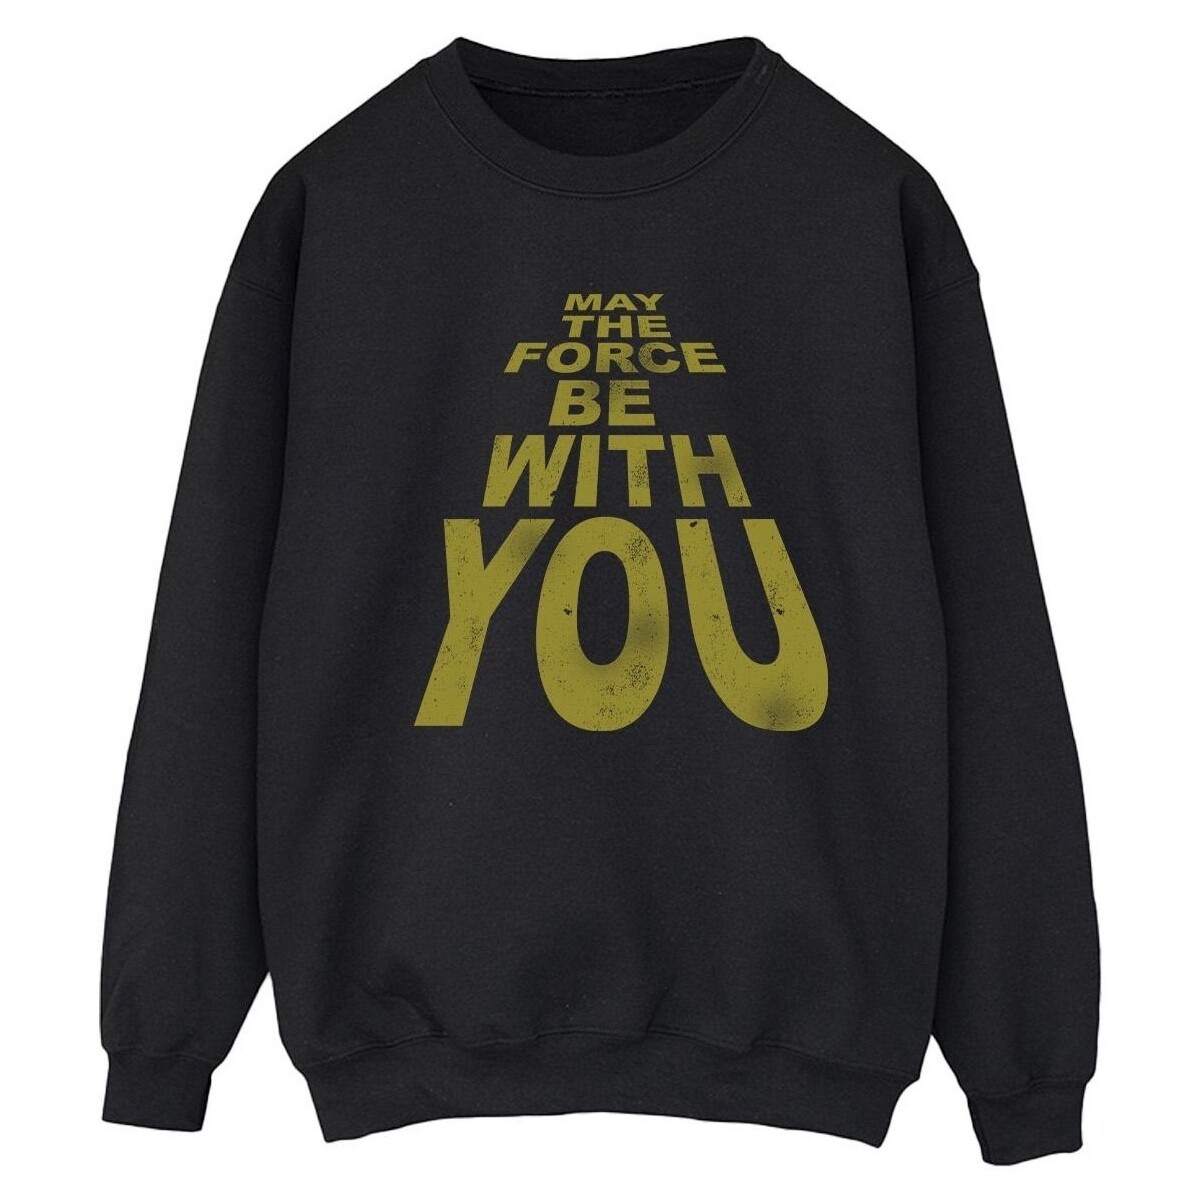 Vêtements Femme Sweats Disney May The Force Be With You Noir